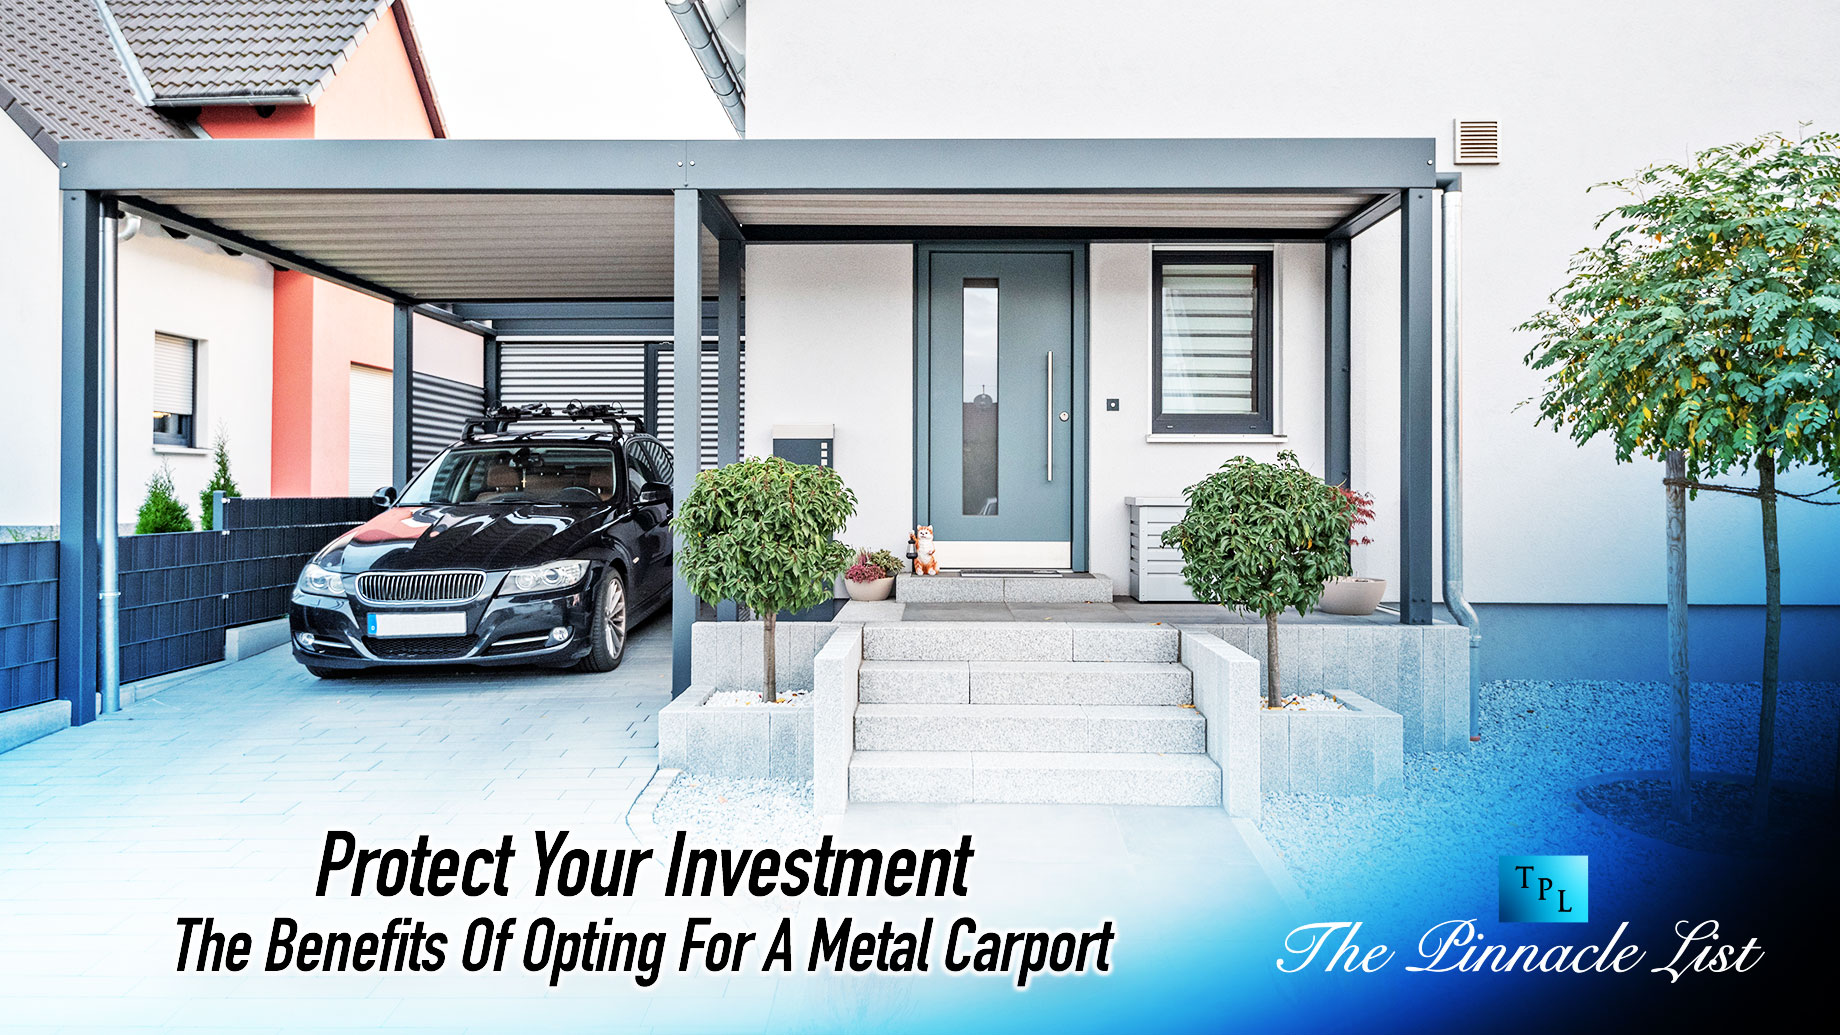 Protect Your Investment: The Benefits Of Opting For A Metal Carport